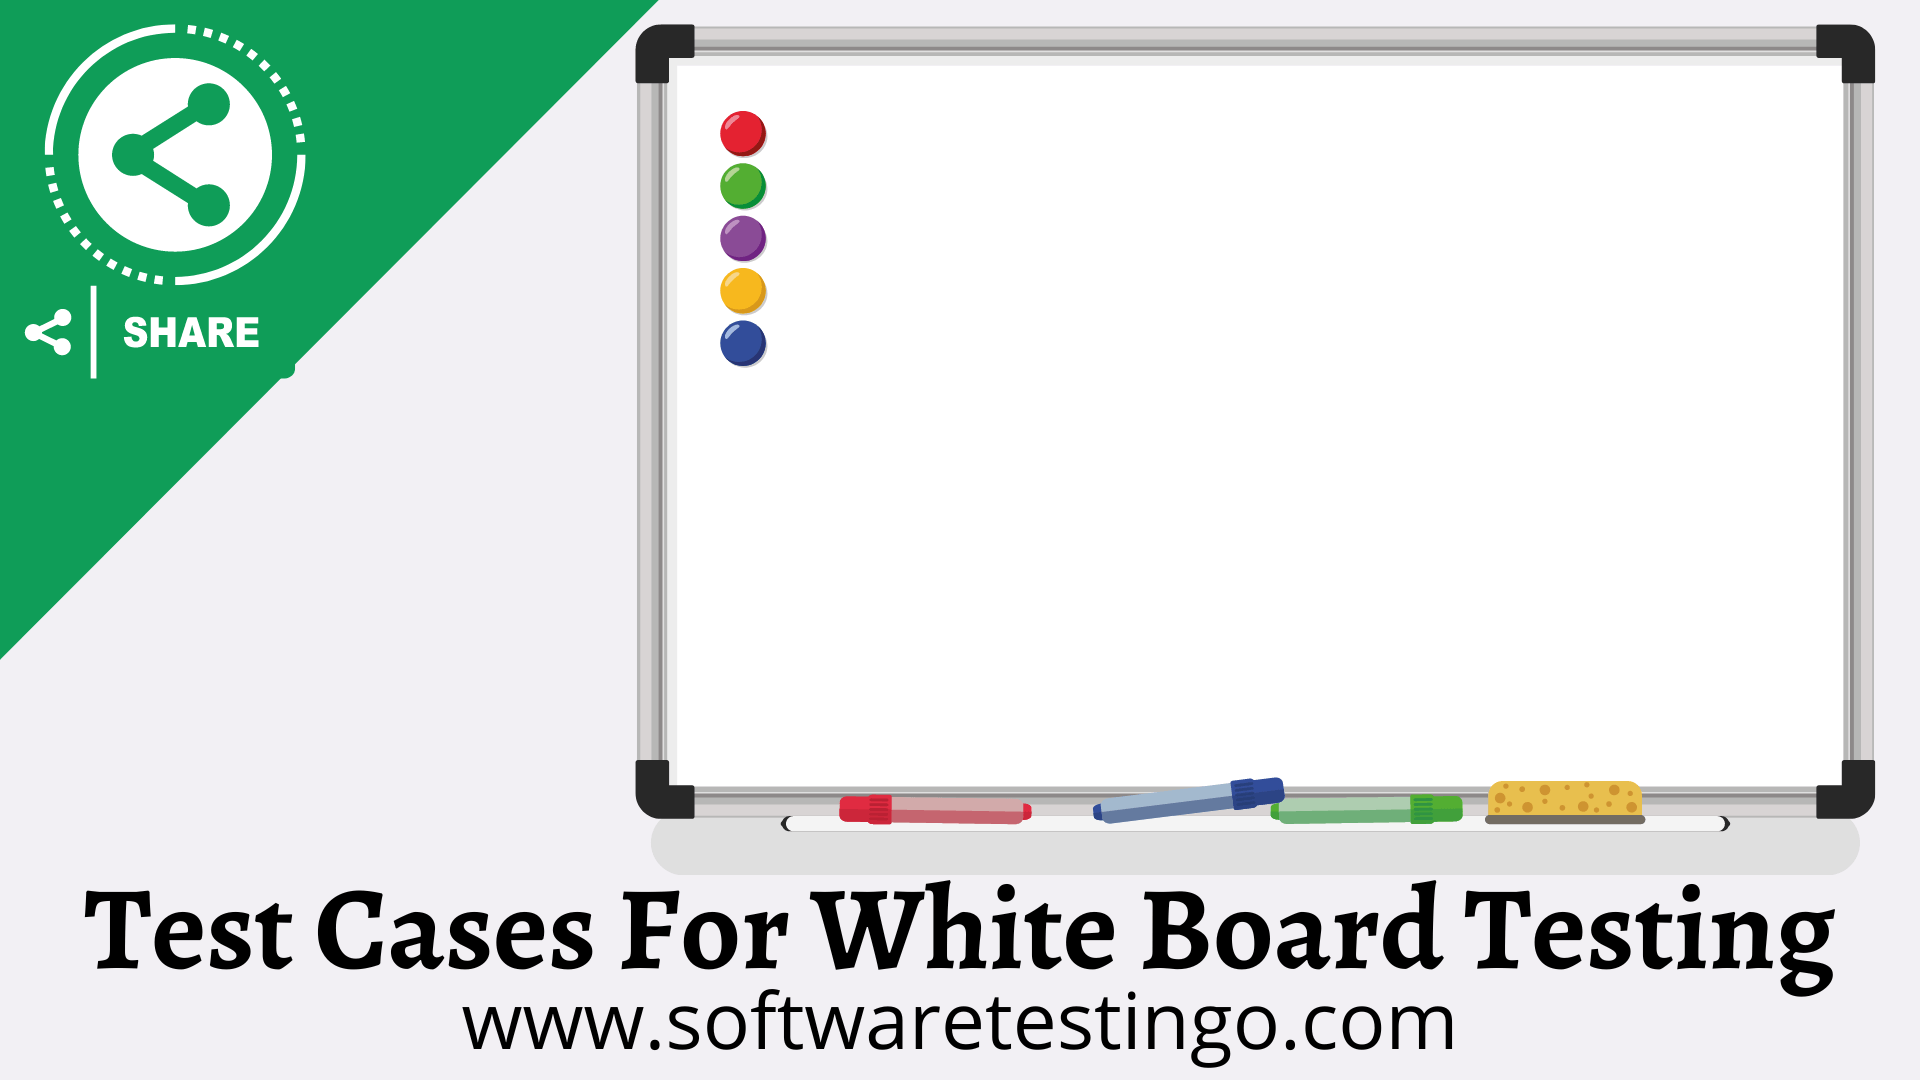 Test Cases For White Board Testing